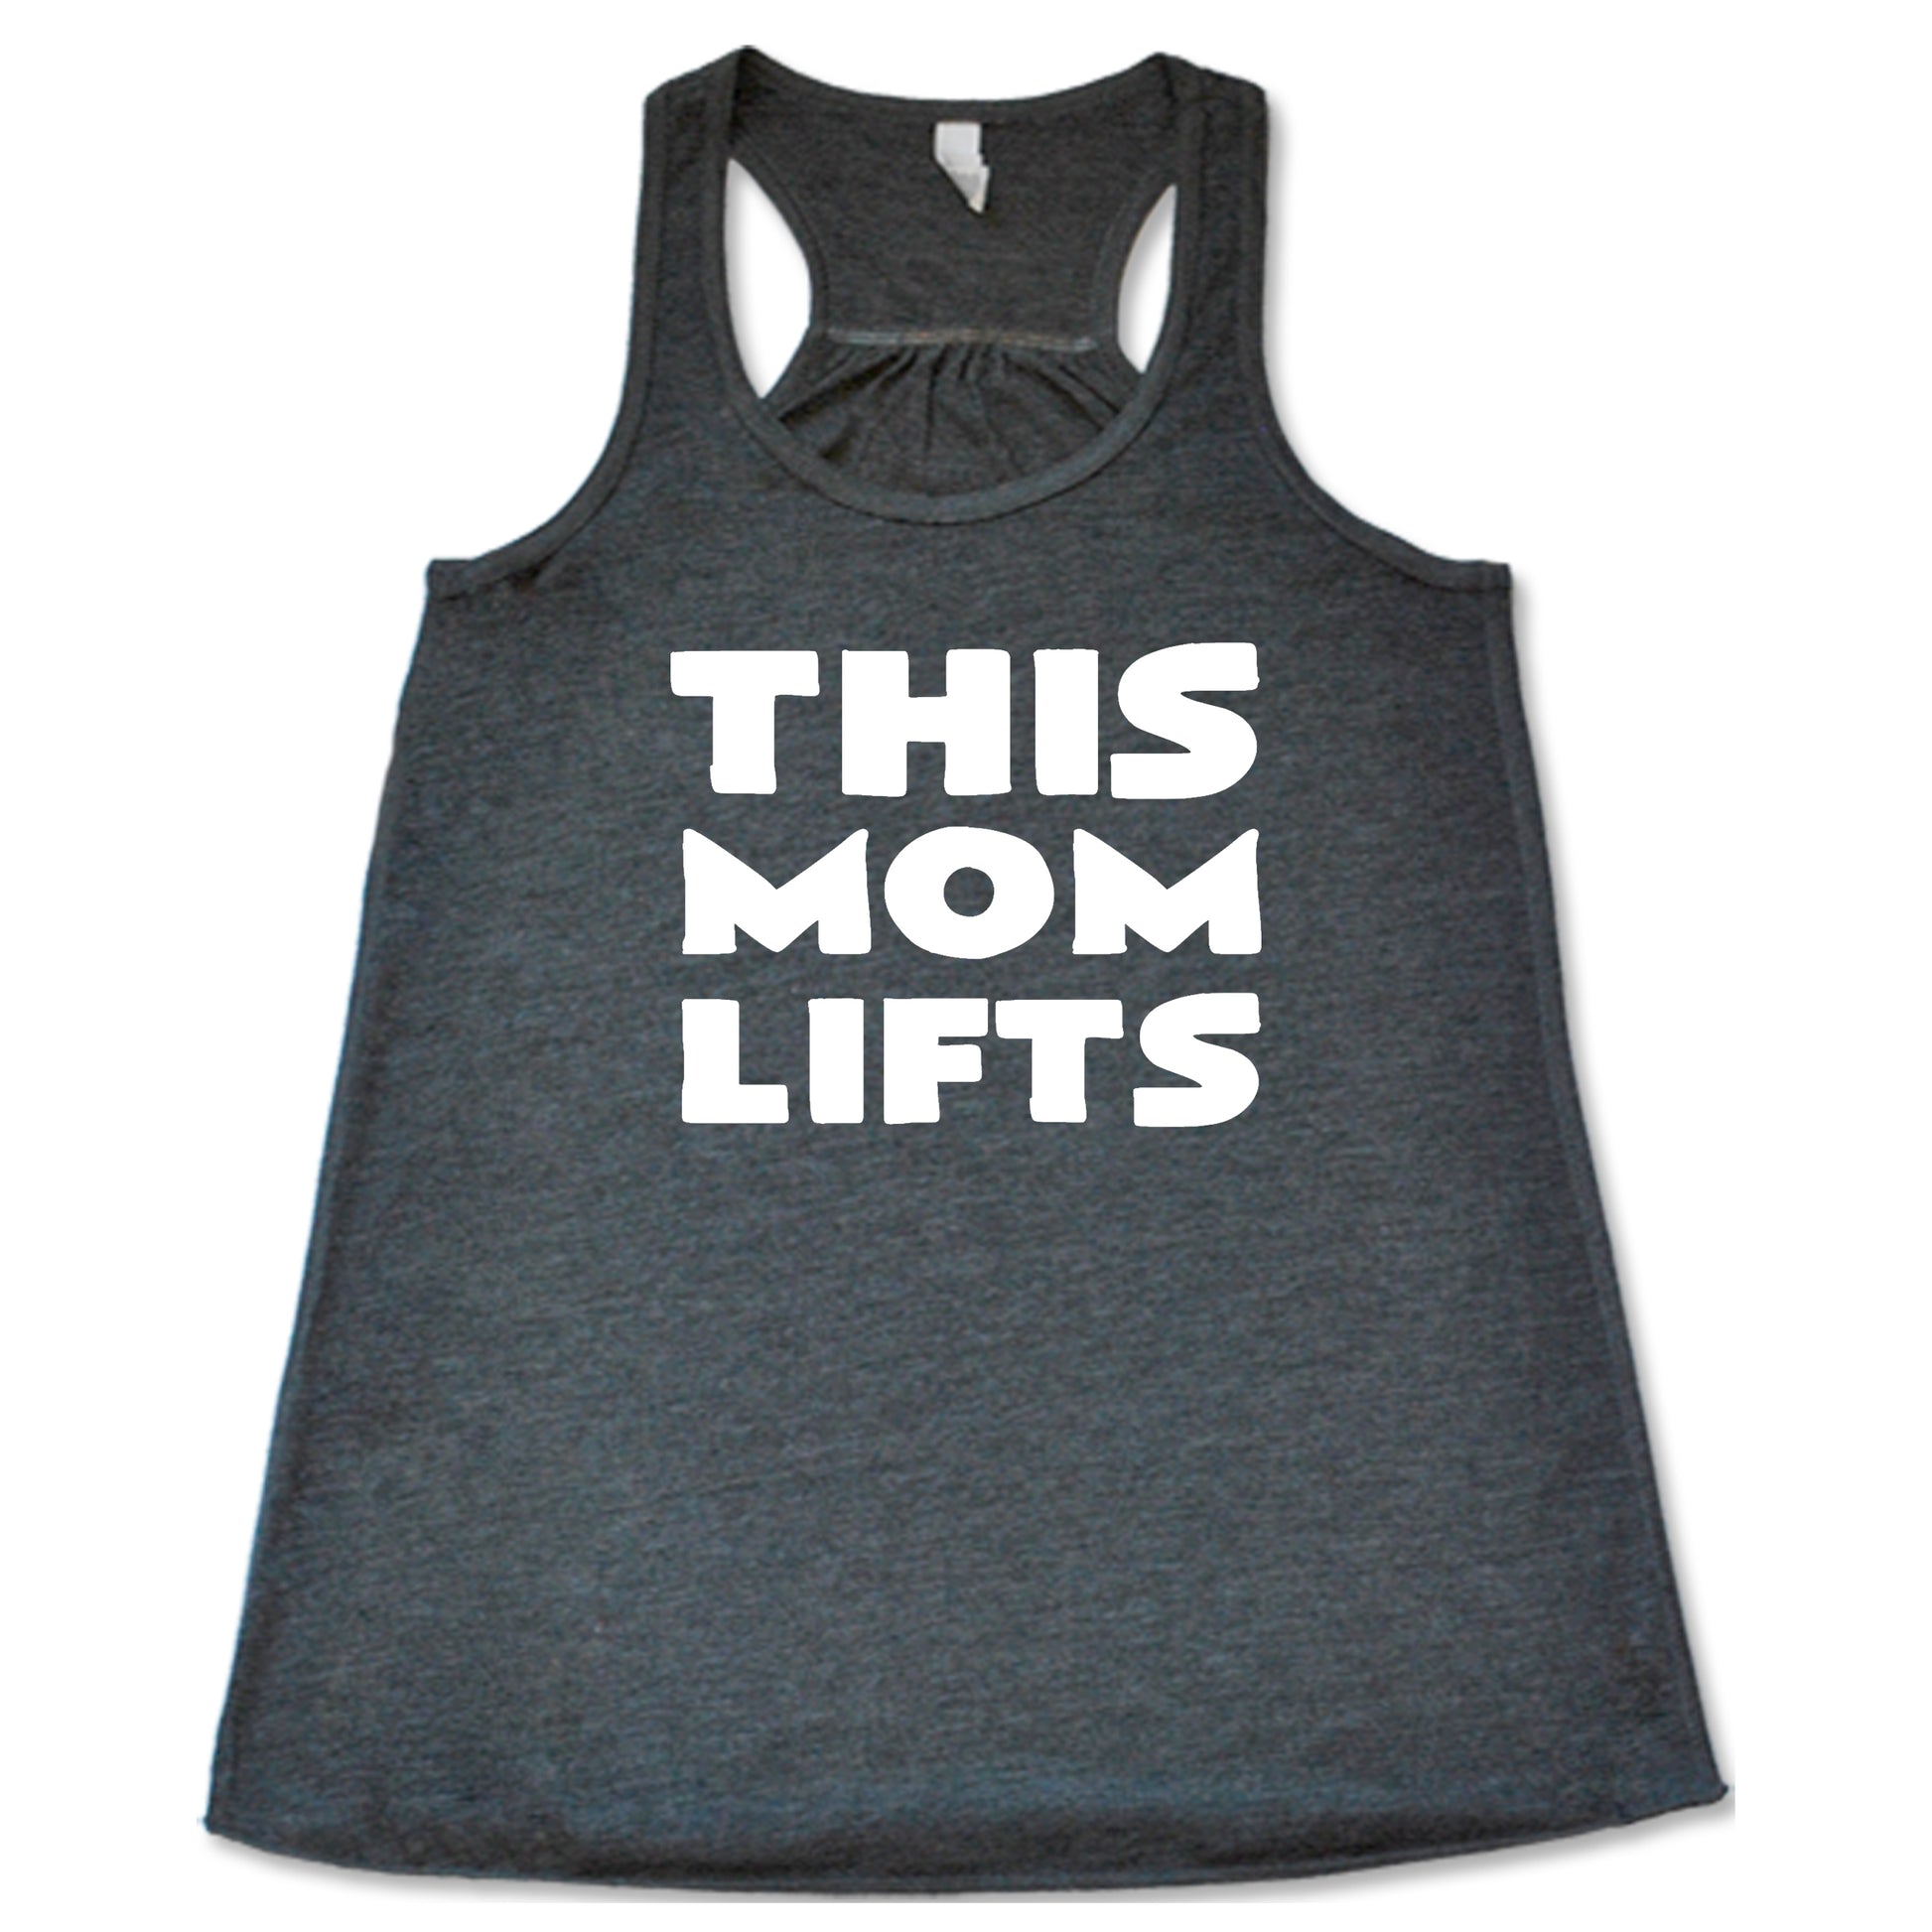 grey racerback shirt with the saying "this mom lifts" in the center in white lettering